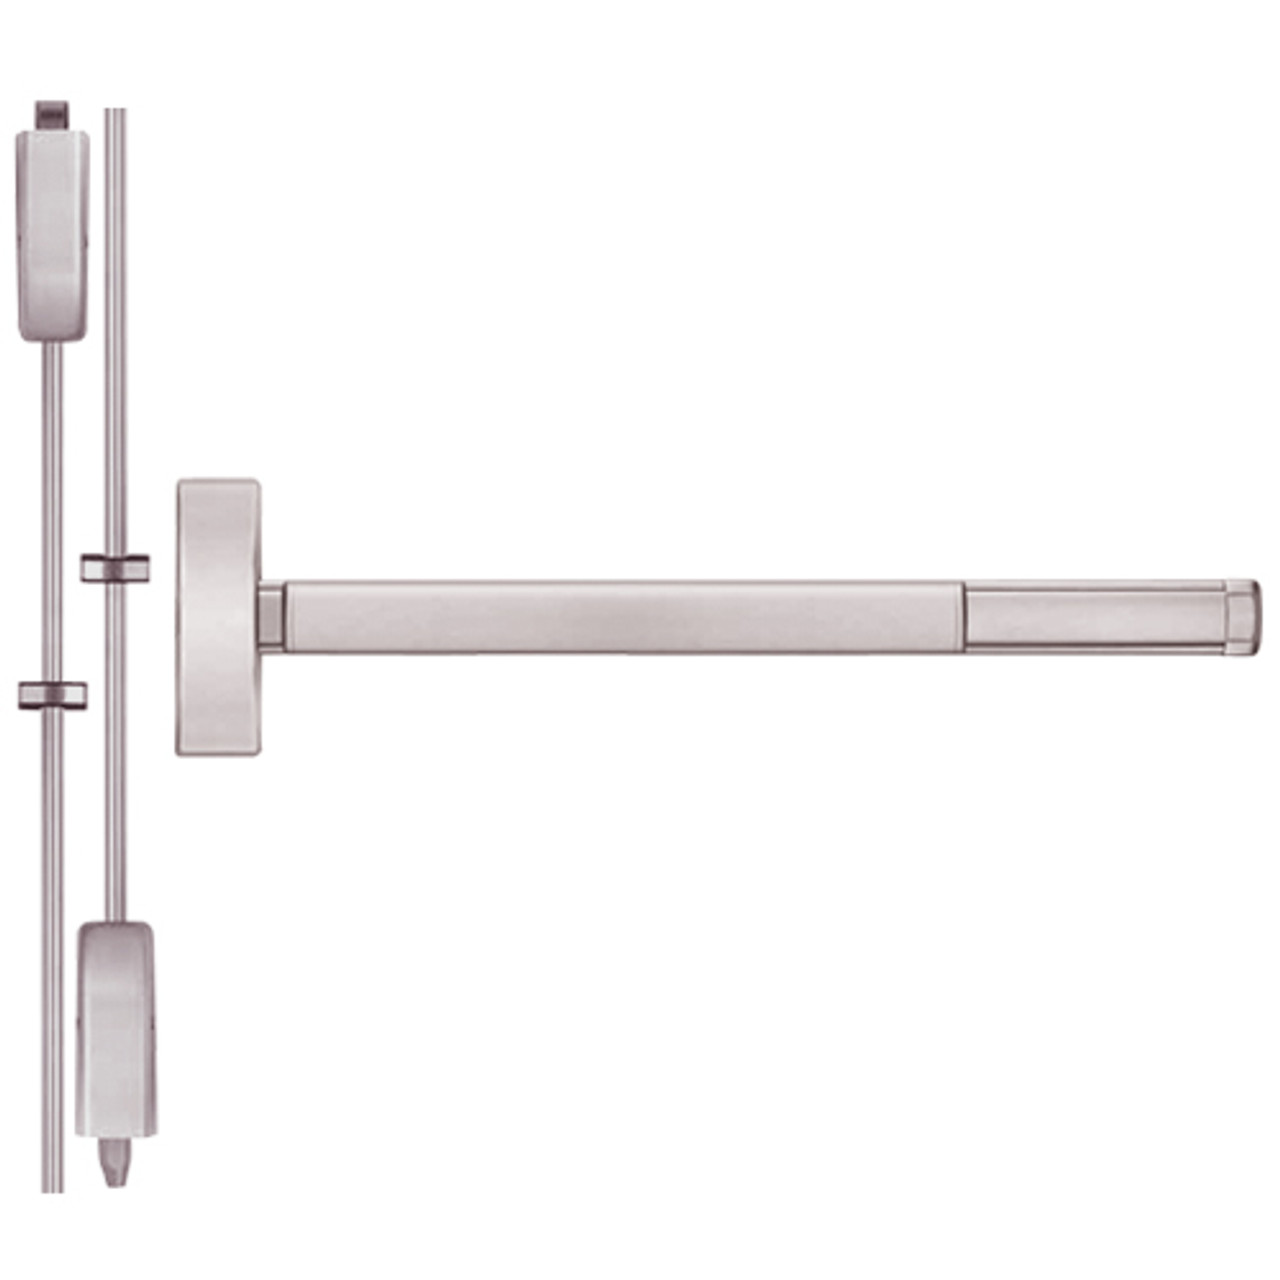 TS2208-628-36 PHI 2200 Series Non Fire Rated Apex Surface Vertical Rod Device with Touchbar Monitoring Switch Prepped for Key Controls Lever/Knob in Satin Aluminum Finish